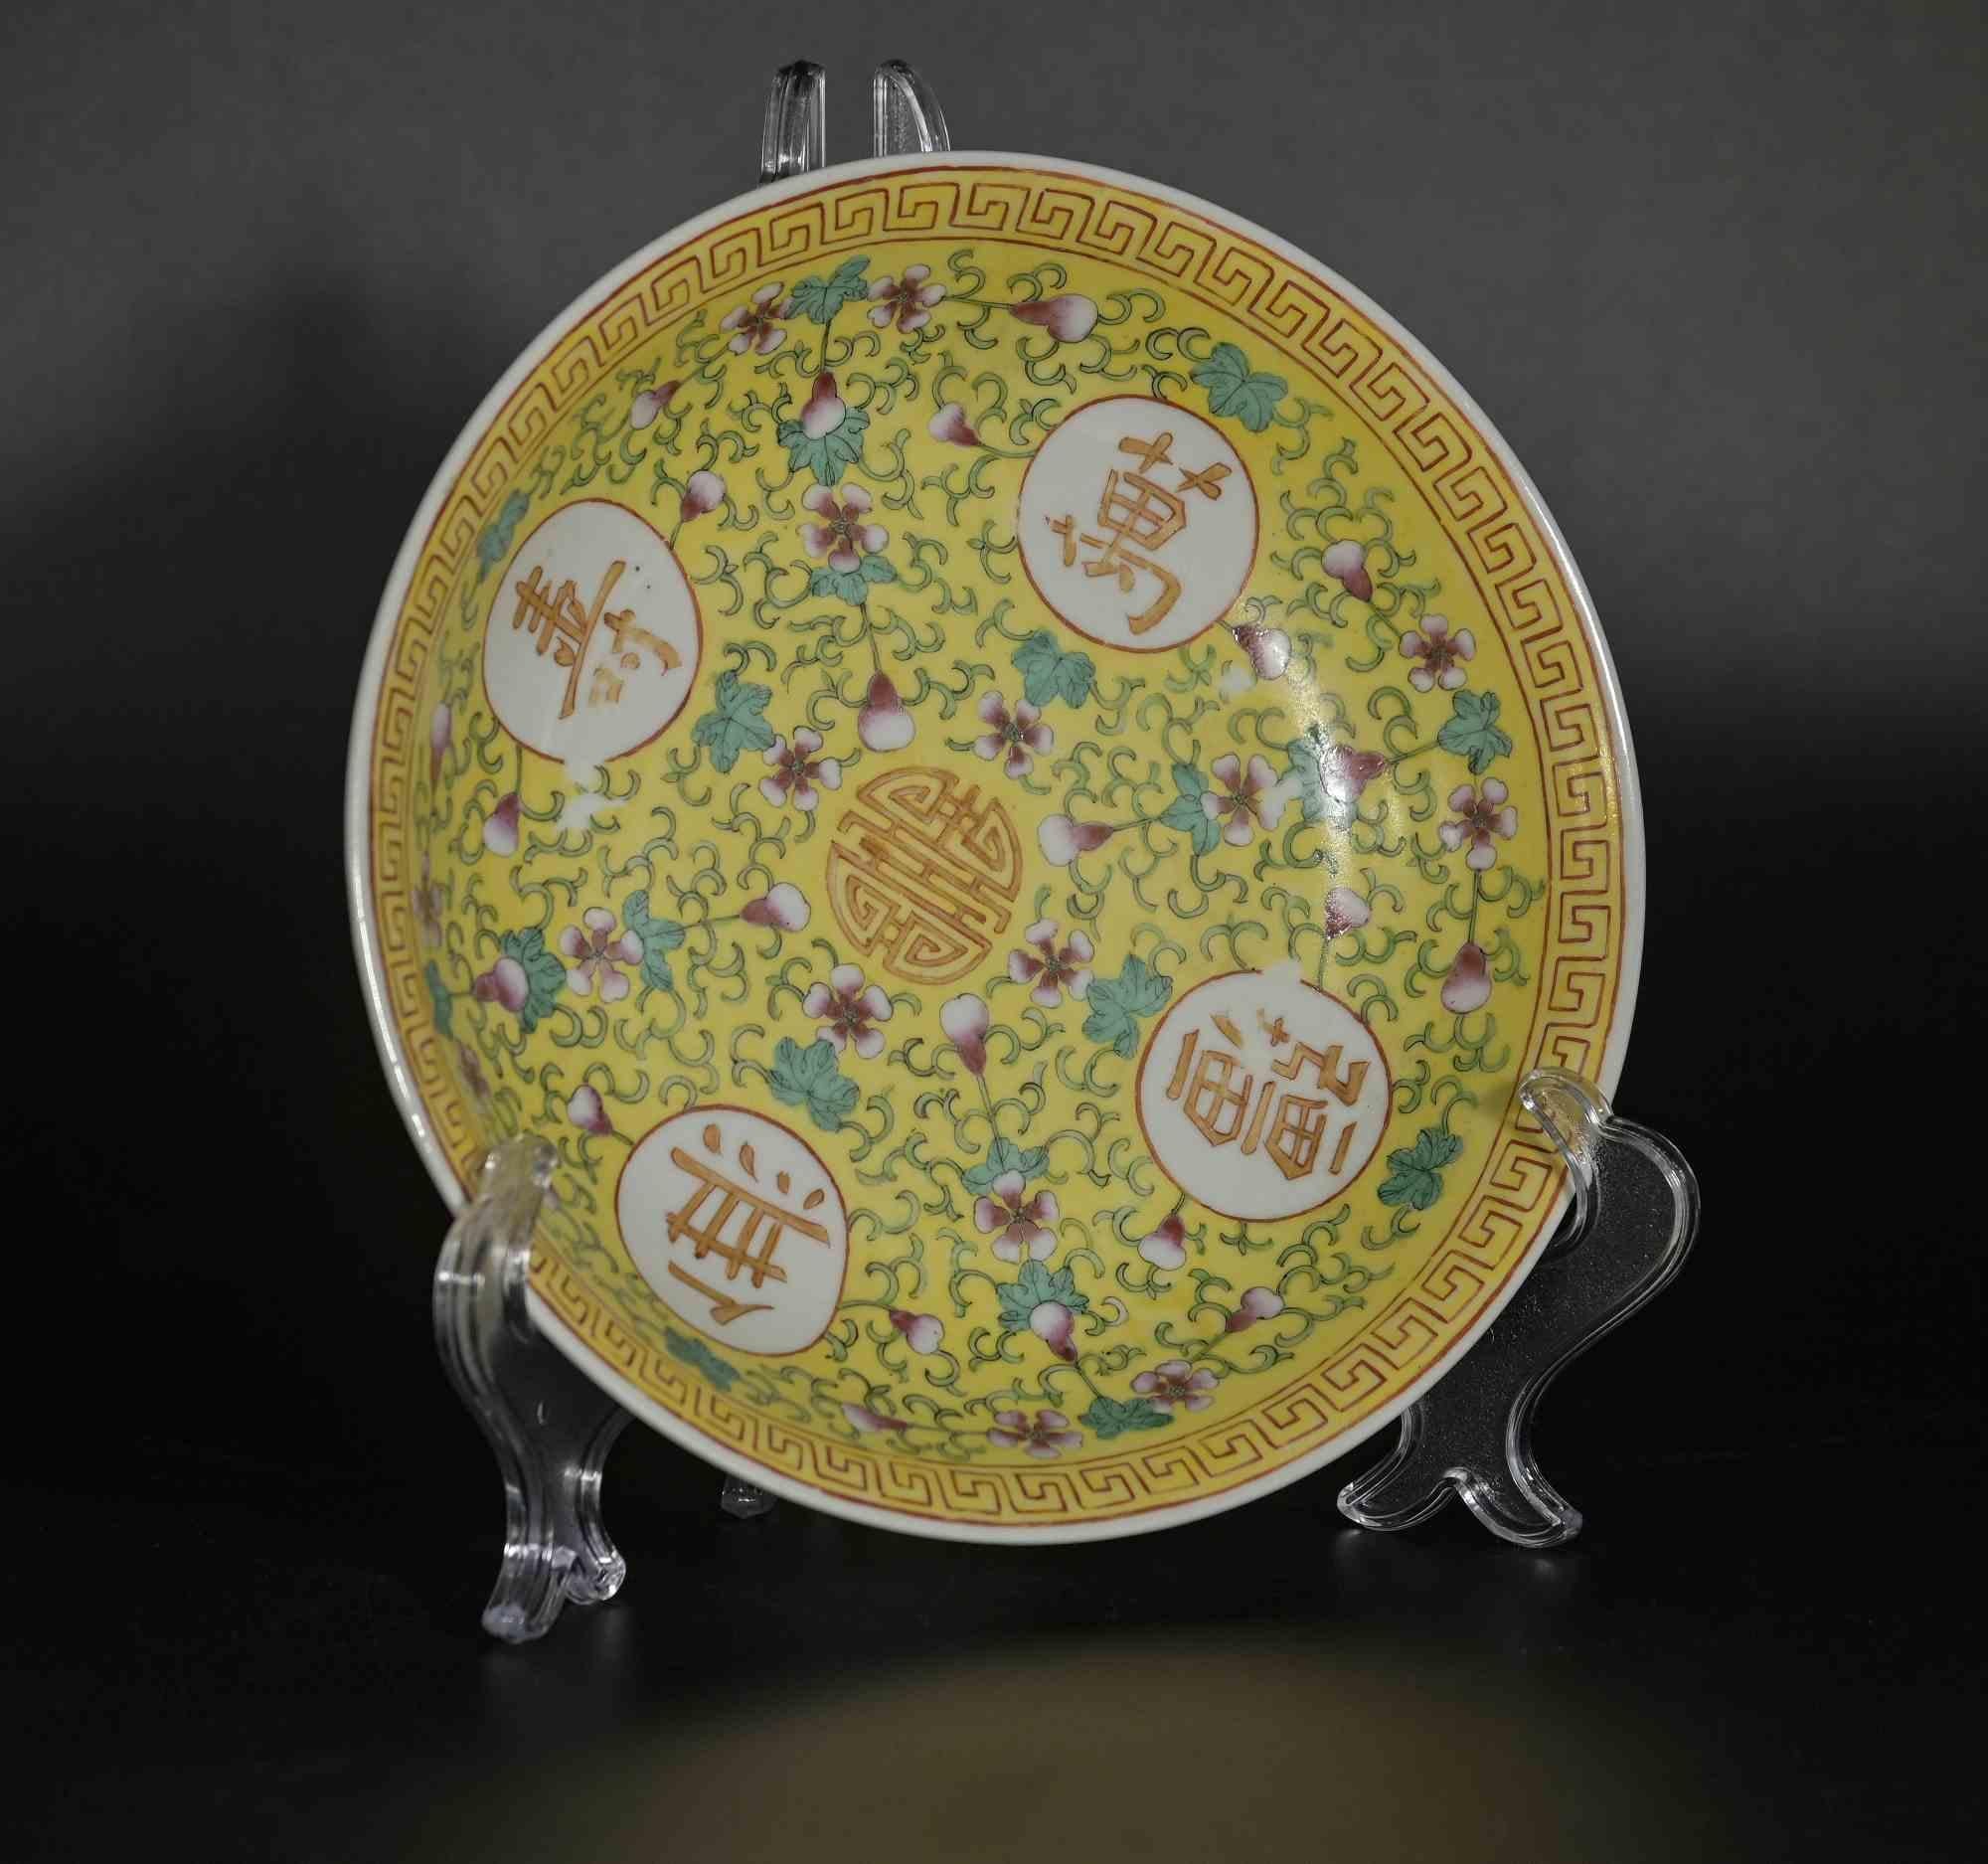 Chinese ceramic plate, China 19th century, probably realized in the reign of Guangxu during the Qing Dynasty.

Floral motifs on yellow, with chinese writing and meanders on the edge. 

Plate diameter 23 cm.

Good conditions.

